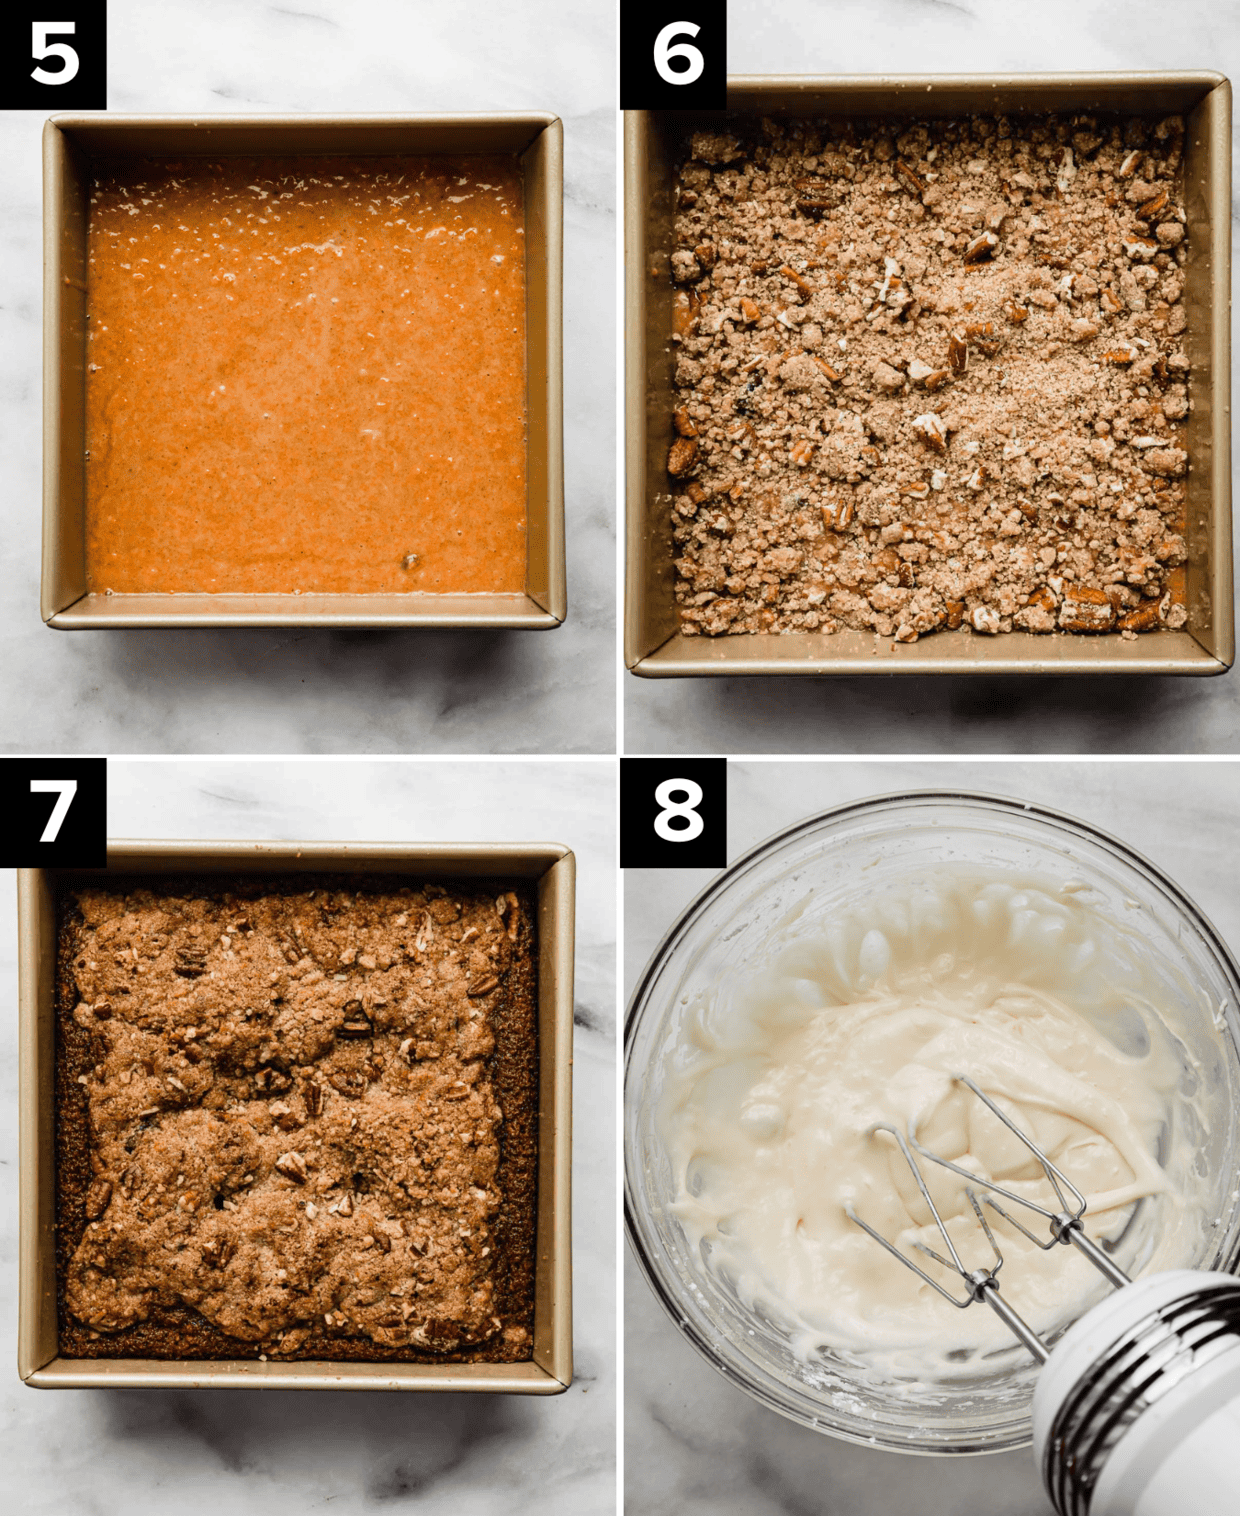 Four images showing unbaked carrot coffee cake in a square pan, then topped with streusel, then baked, and a glass bowl with cream cheese glaze.